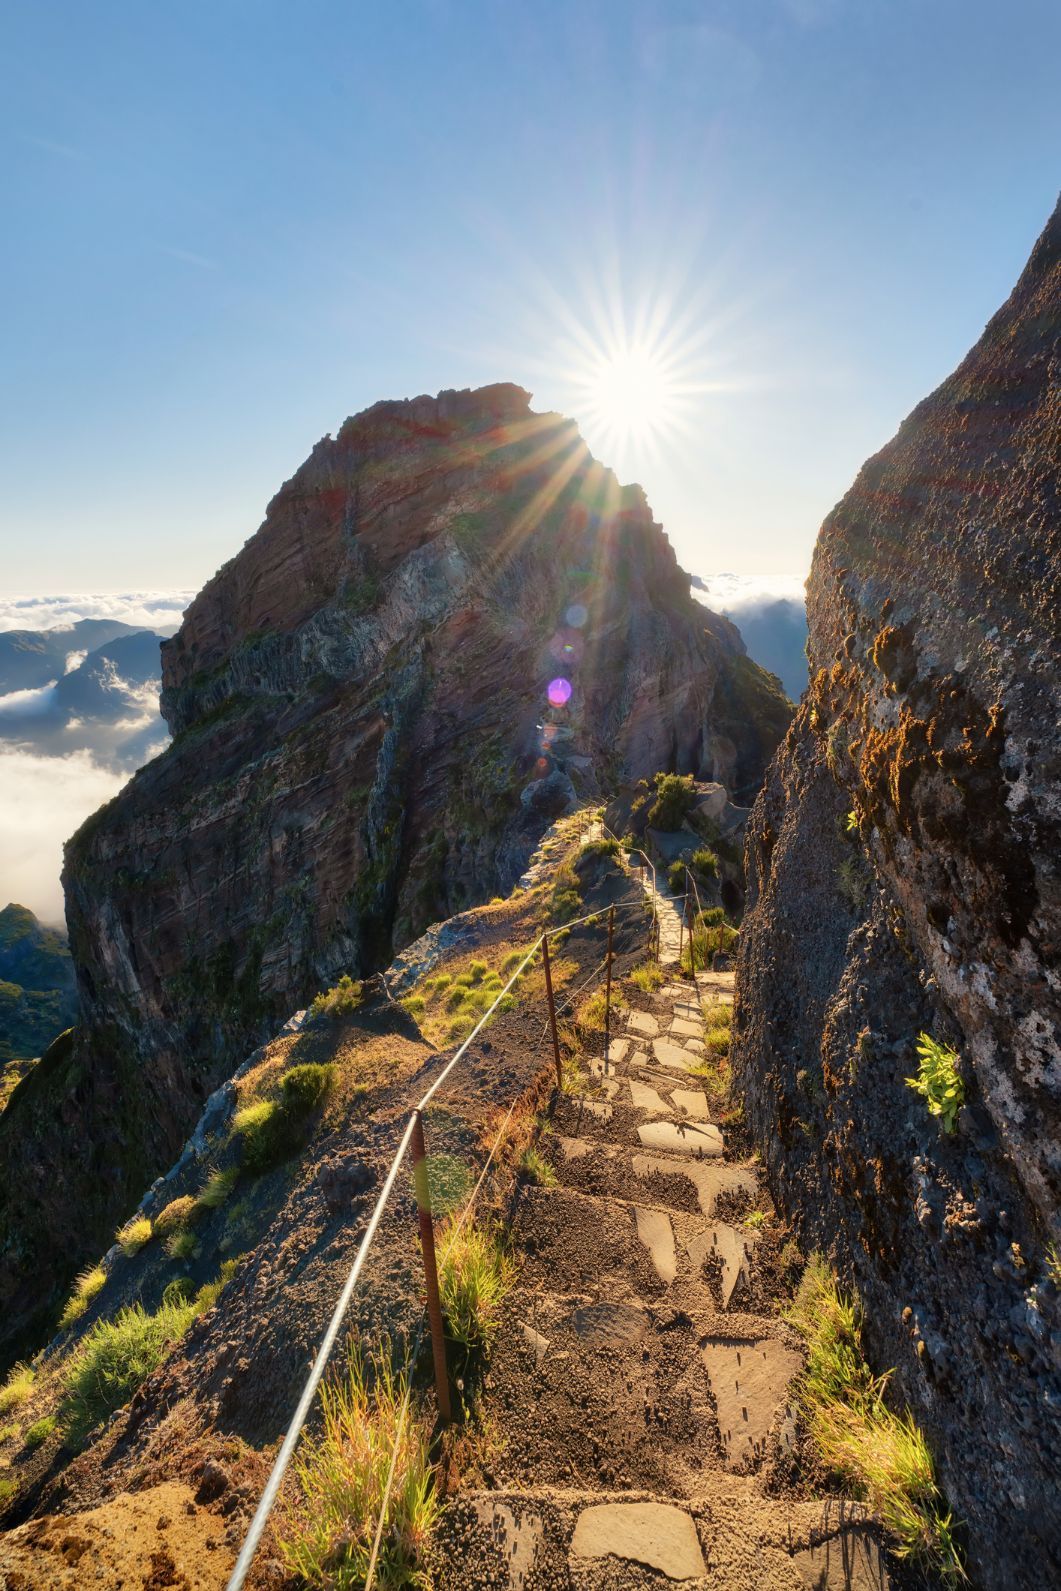 The hiking path up Pico Ruivo in Madeira.